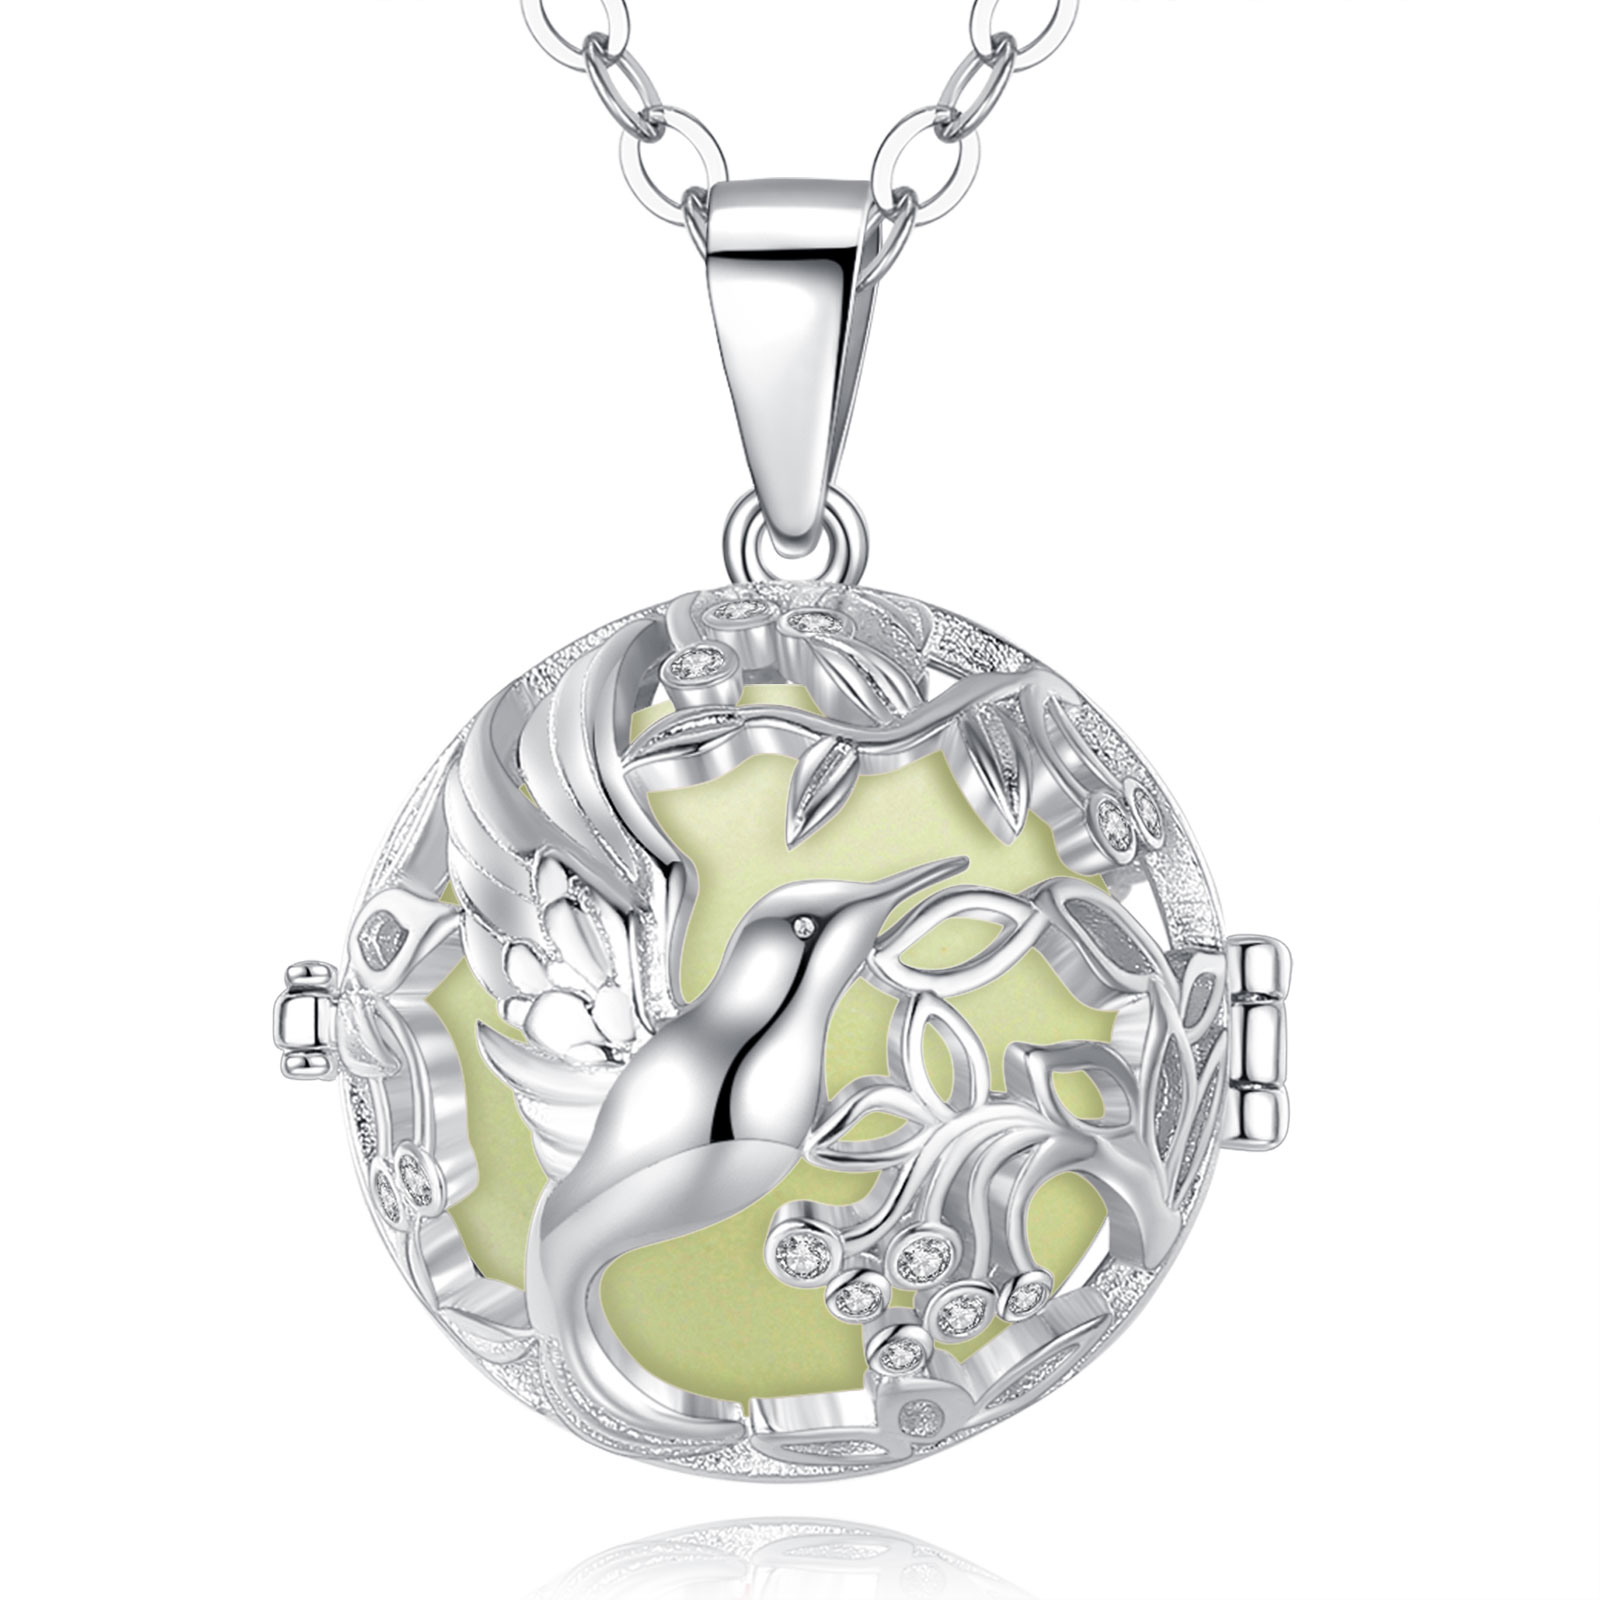 Merryshine Jewelry Hummingbird Design Hollow Out Harmony Cage Pregnant Pendant Necklace